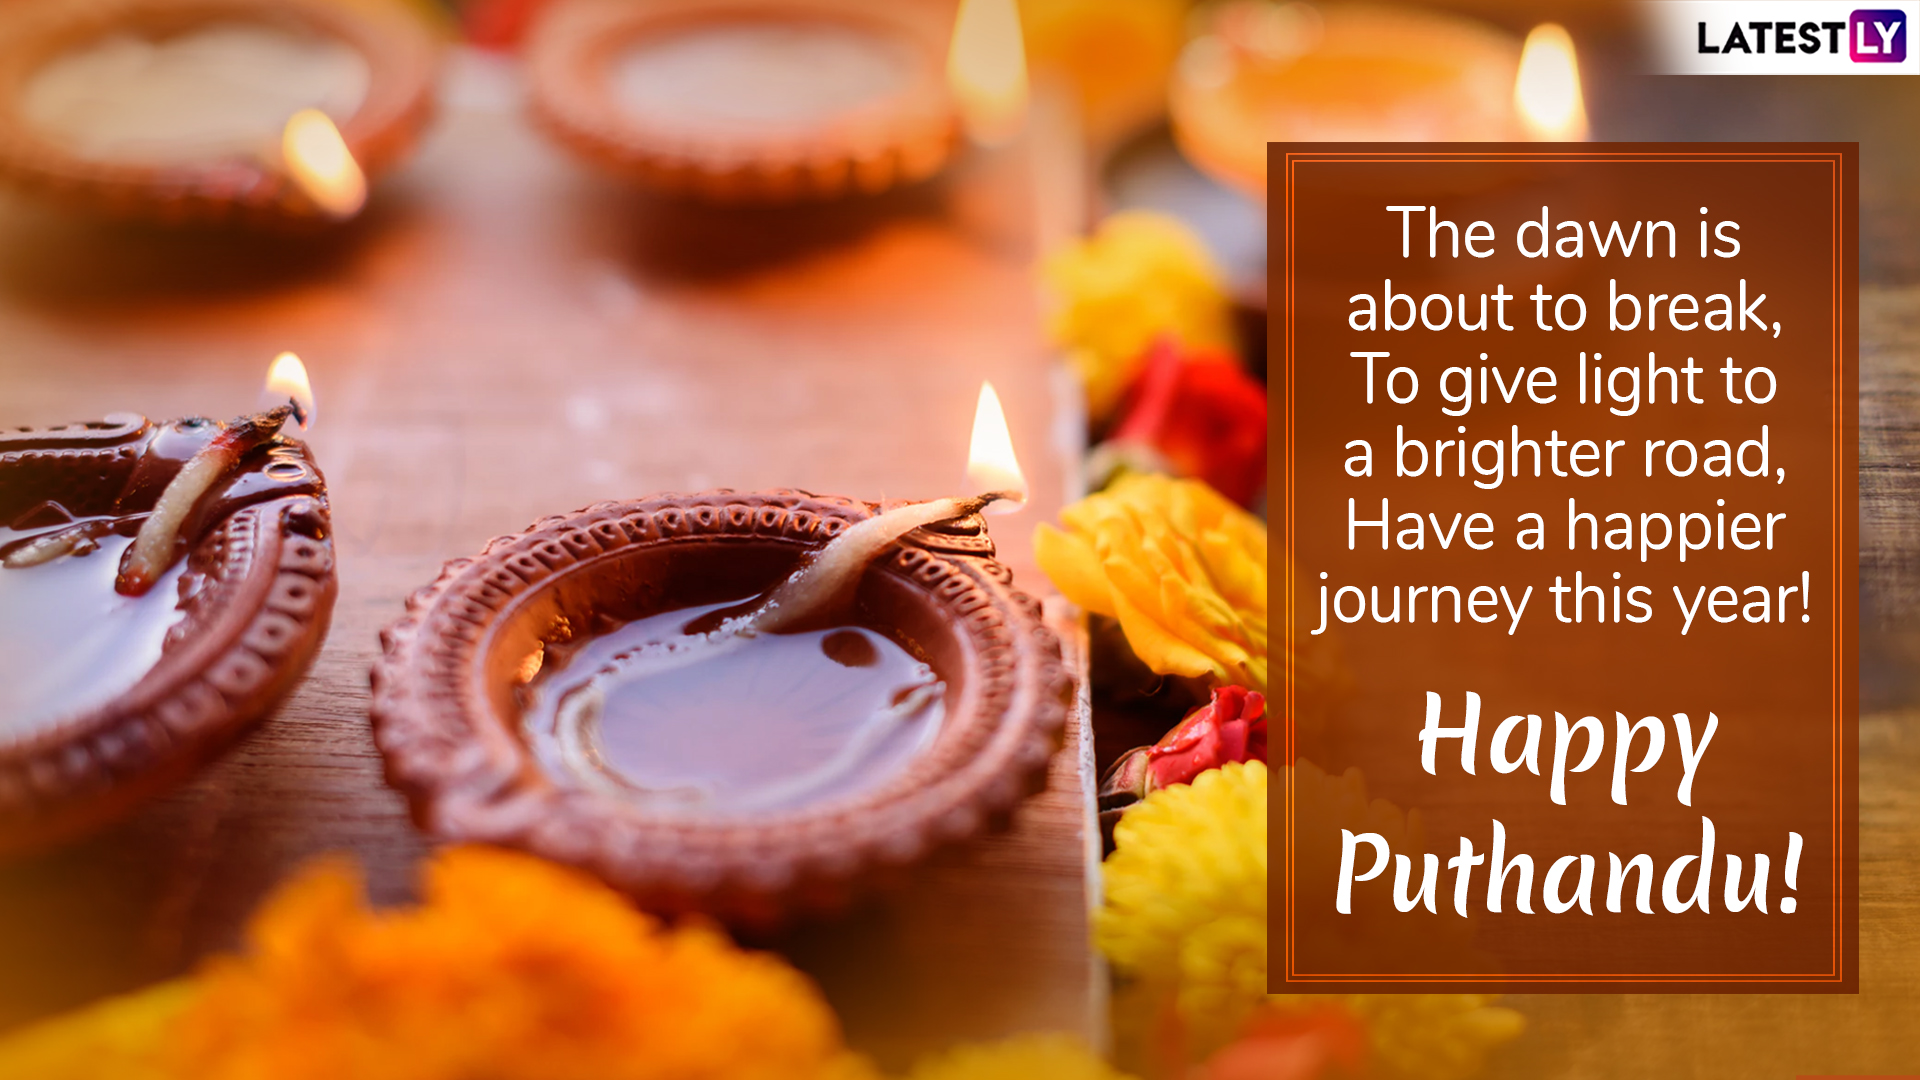 Happy Puthandu 2022 Wishes & Puthandu Vazthukal HD Images: Greetings,  WhatsApp Messages, SMS and Wallpapers To Send on Tamil New Year